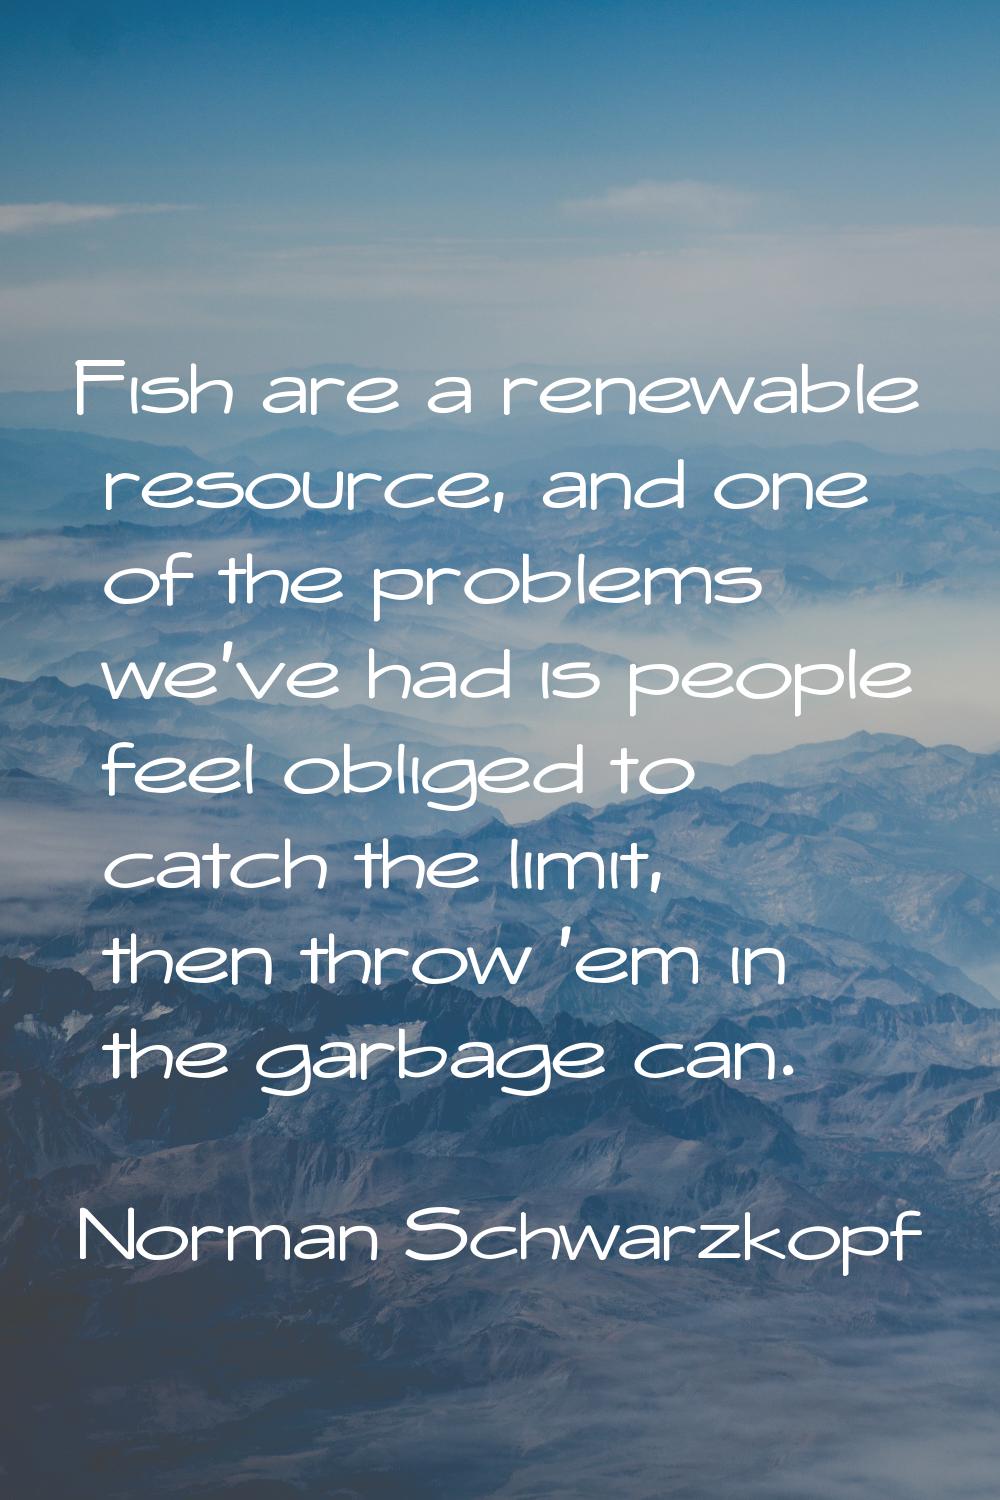 Fish are a renewable resource, and one of the problems we've had is people feel obliged to catch th